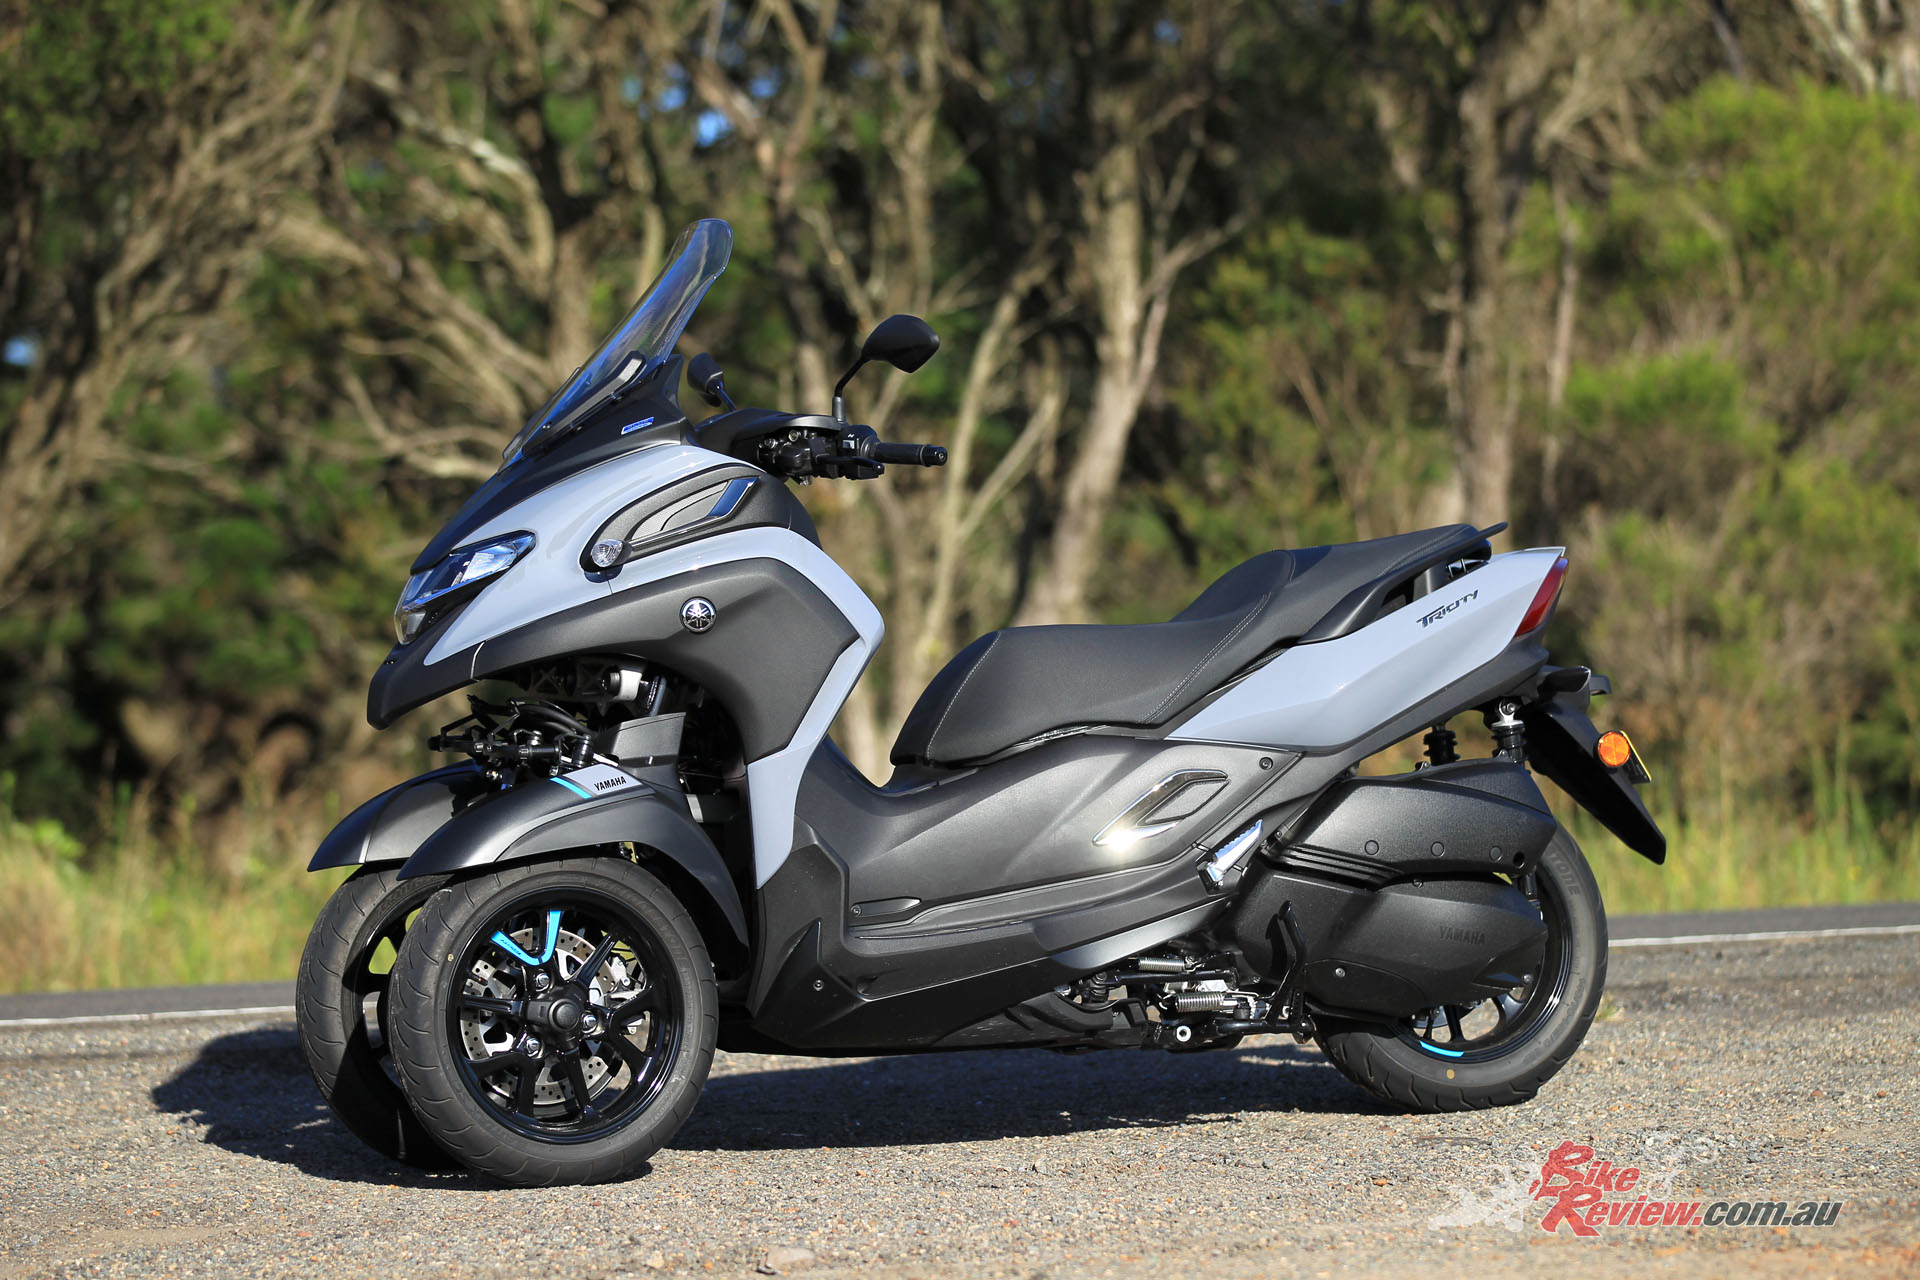 Review: 2020 Yamaha Tricity 300 - Bike Review